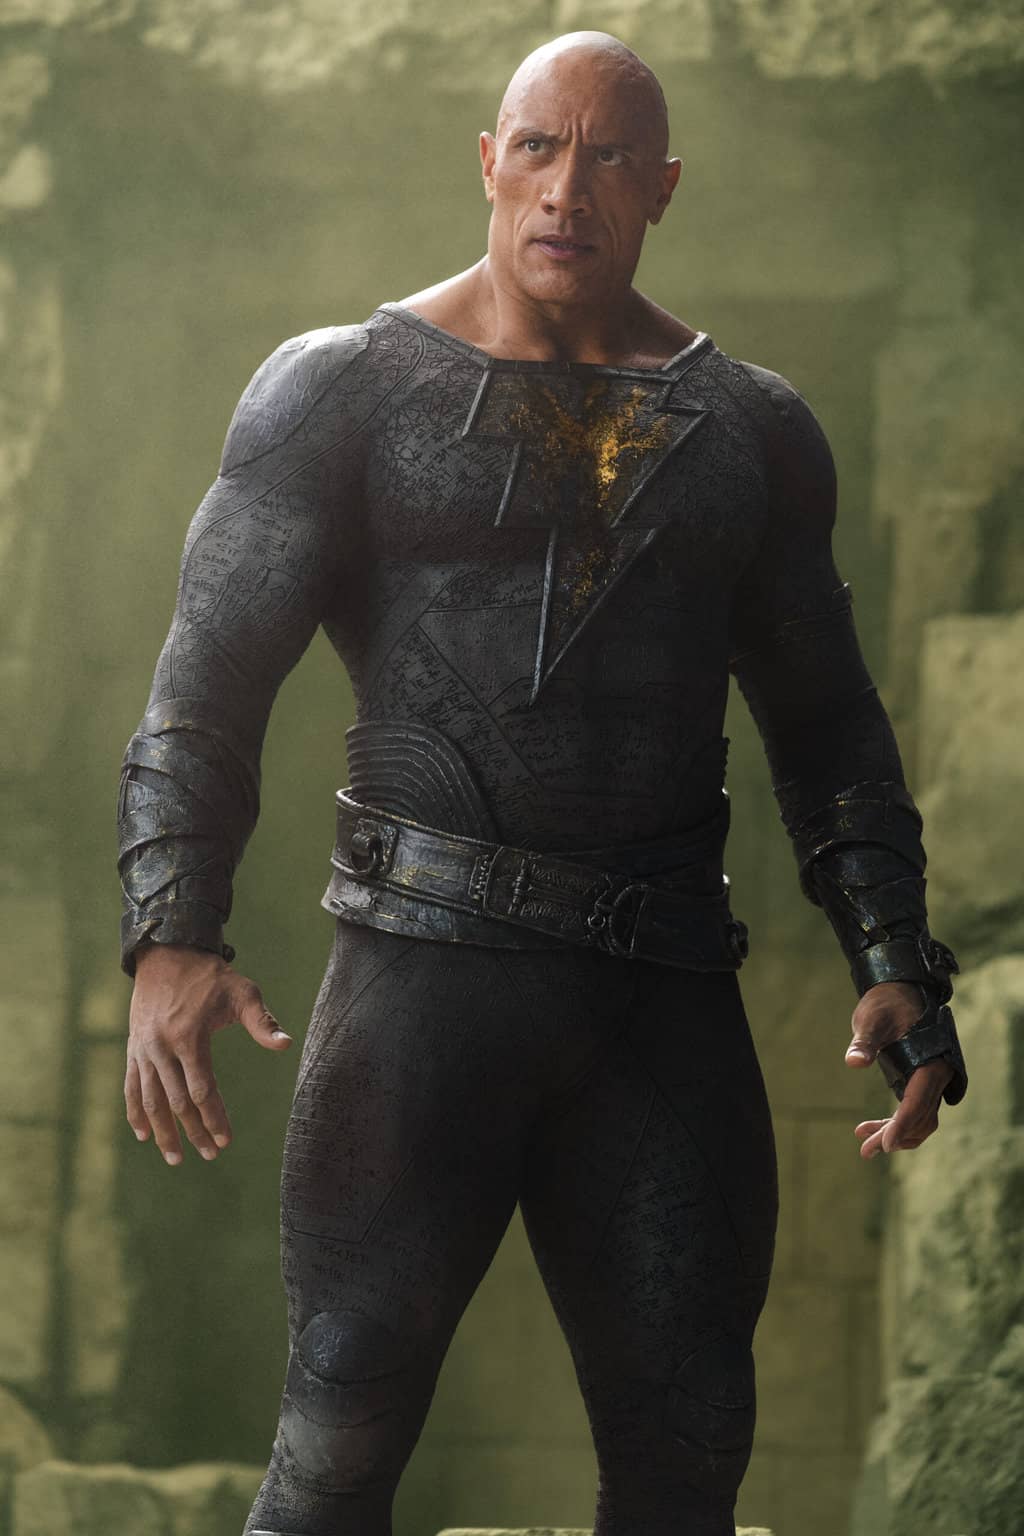 can kids watch black adam? parent guide and age rating recomendation